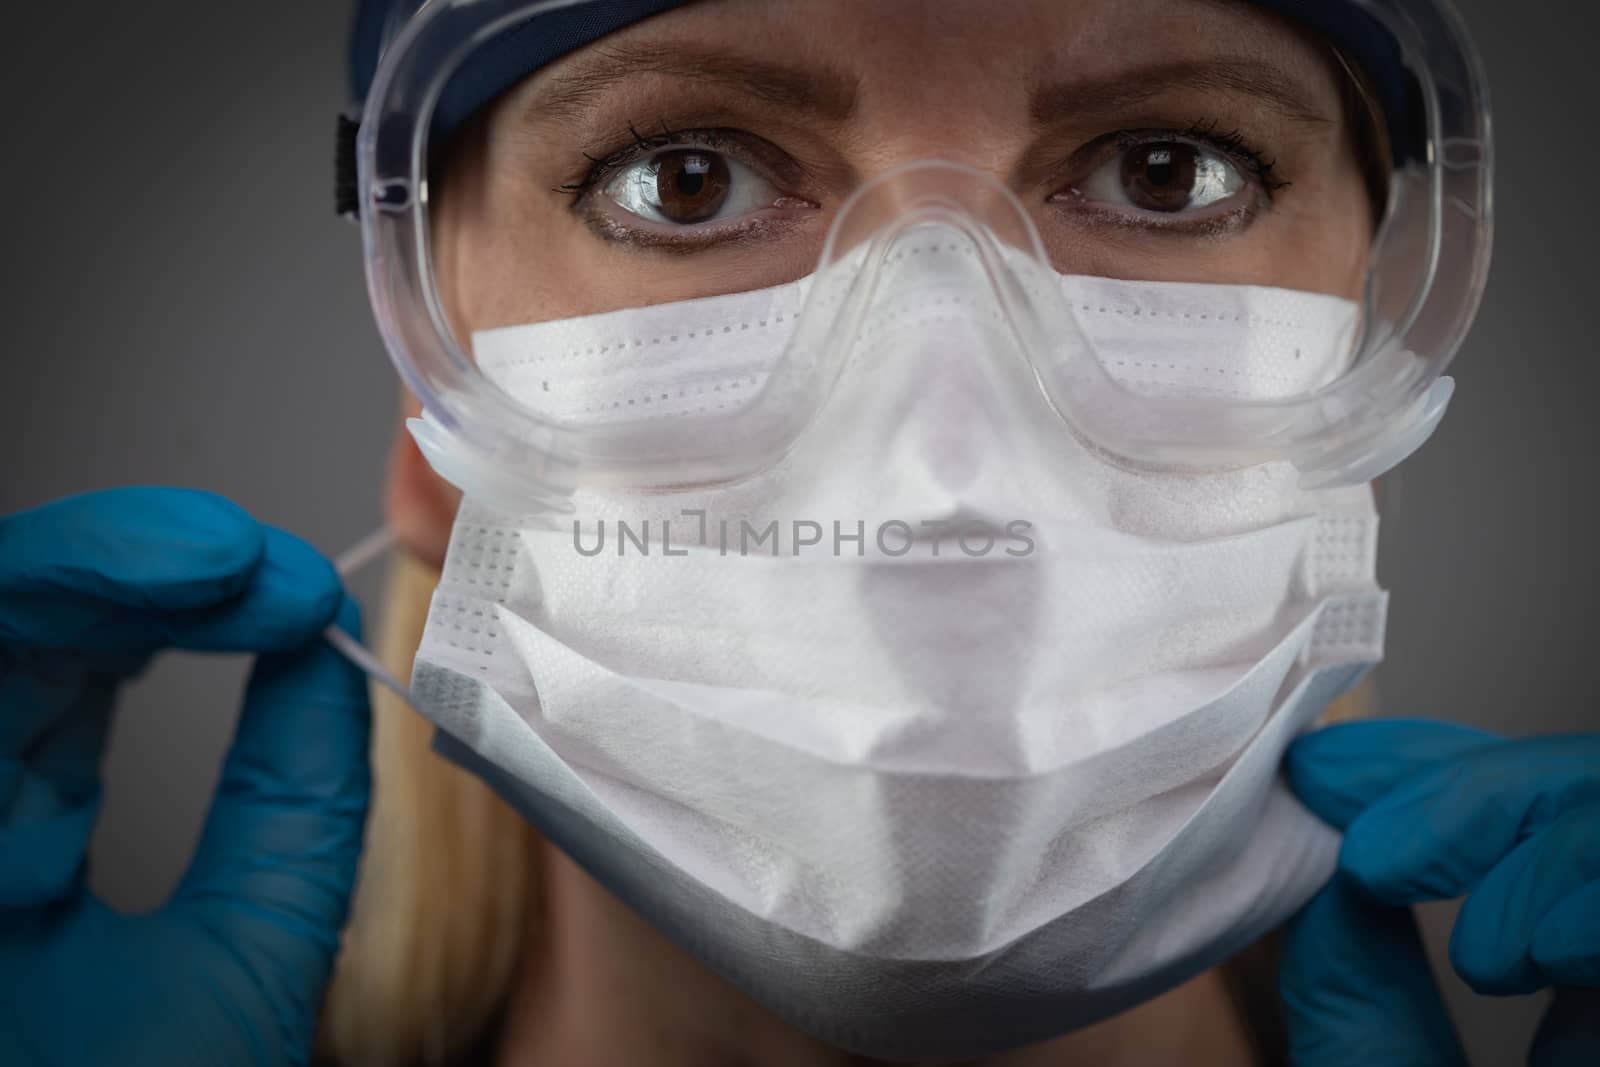 Female Medical Worker Wearing Protective Face Mask and Gear Against Dark Background. by Feverpitched